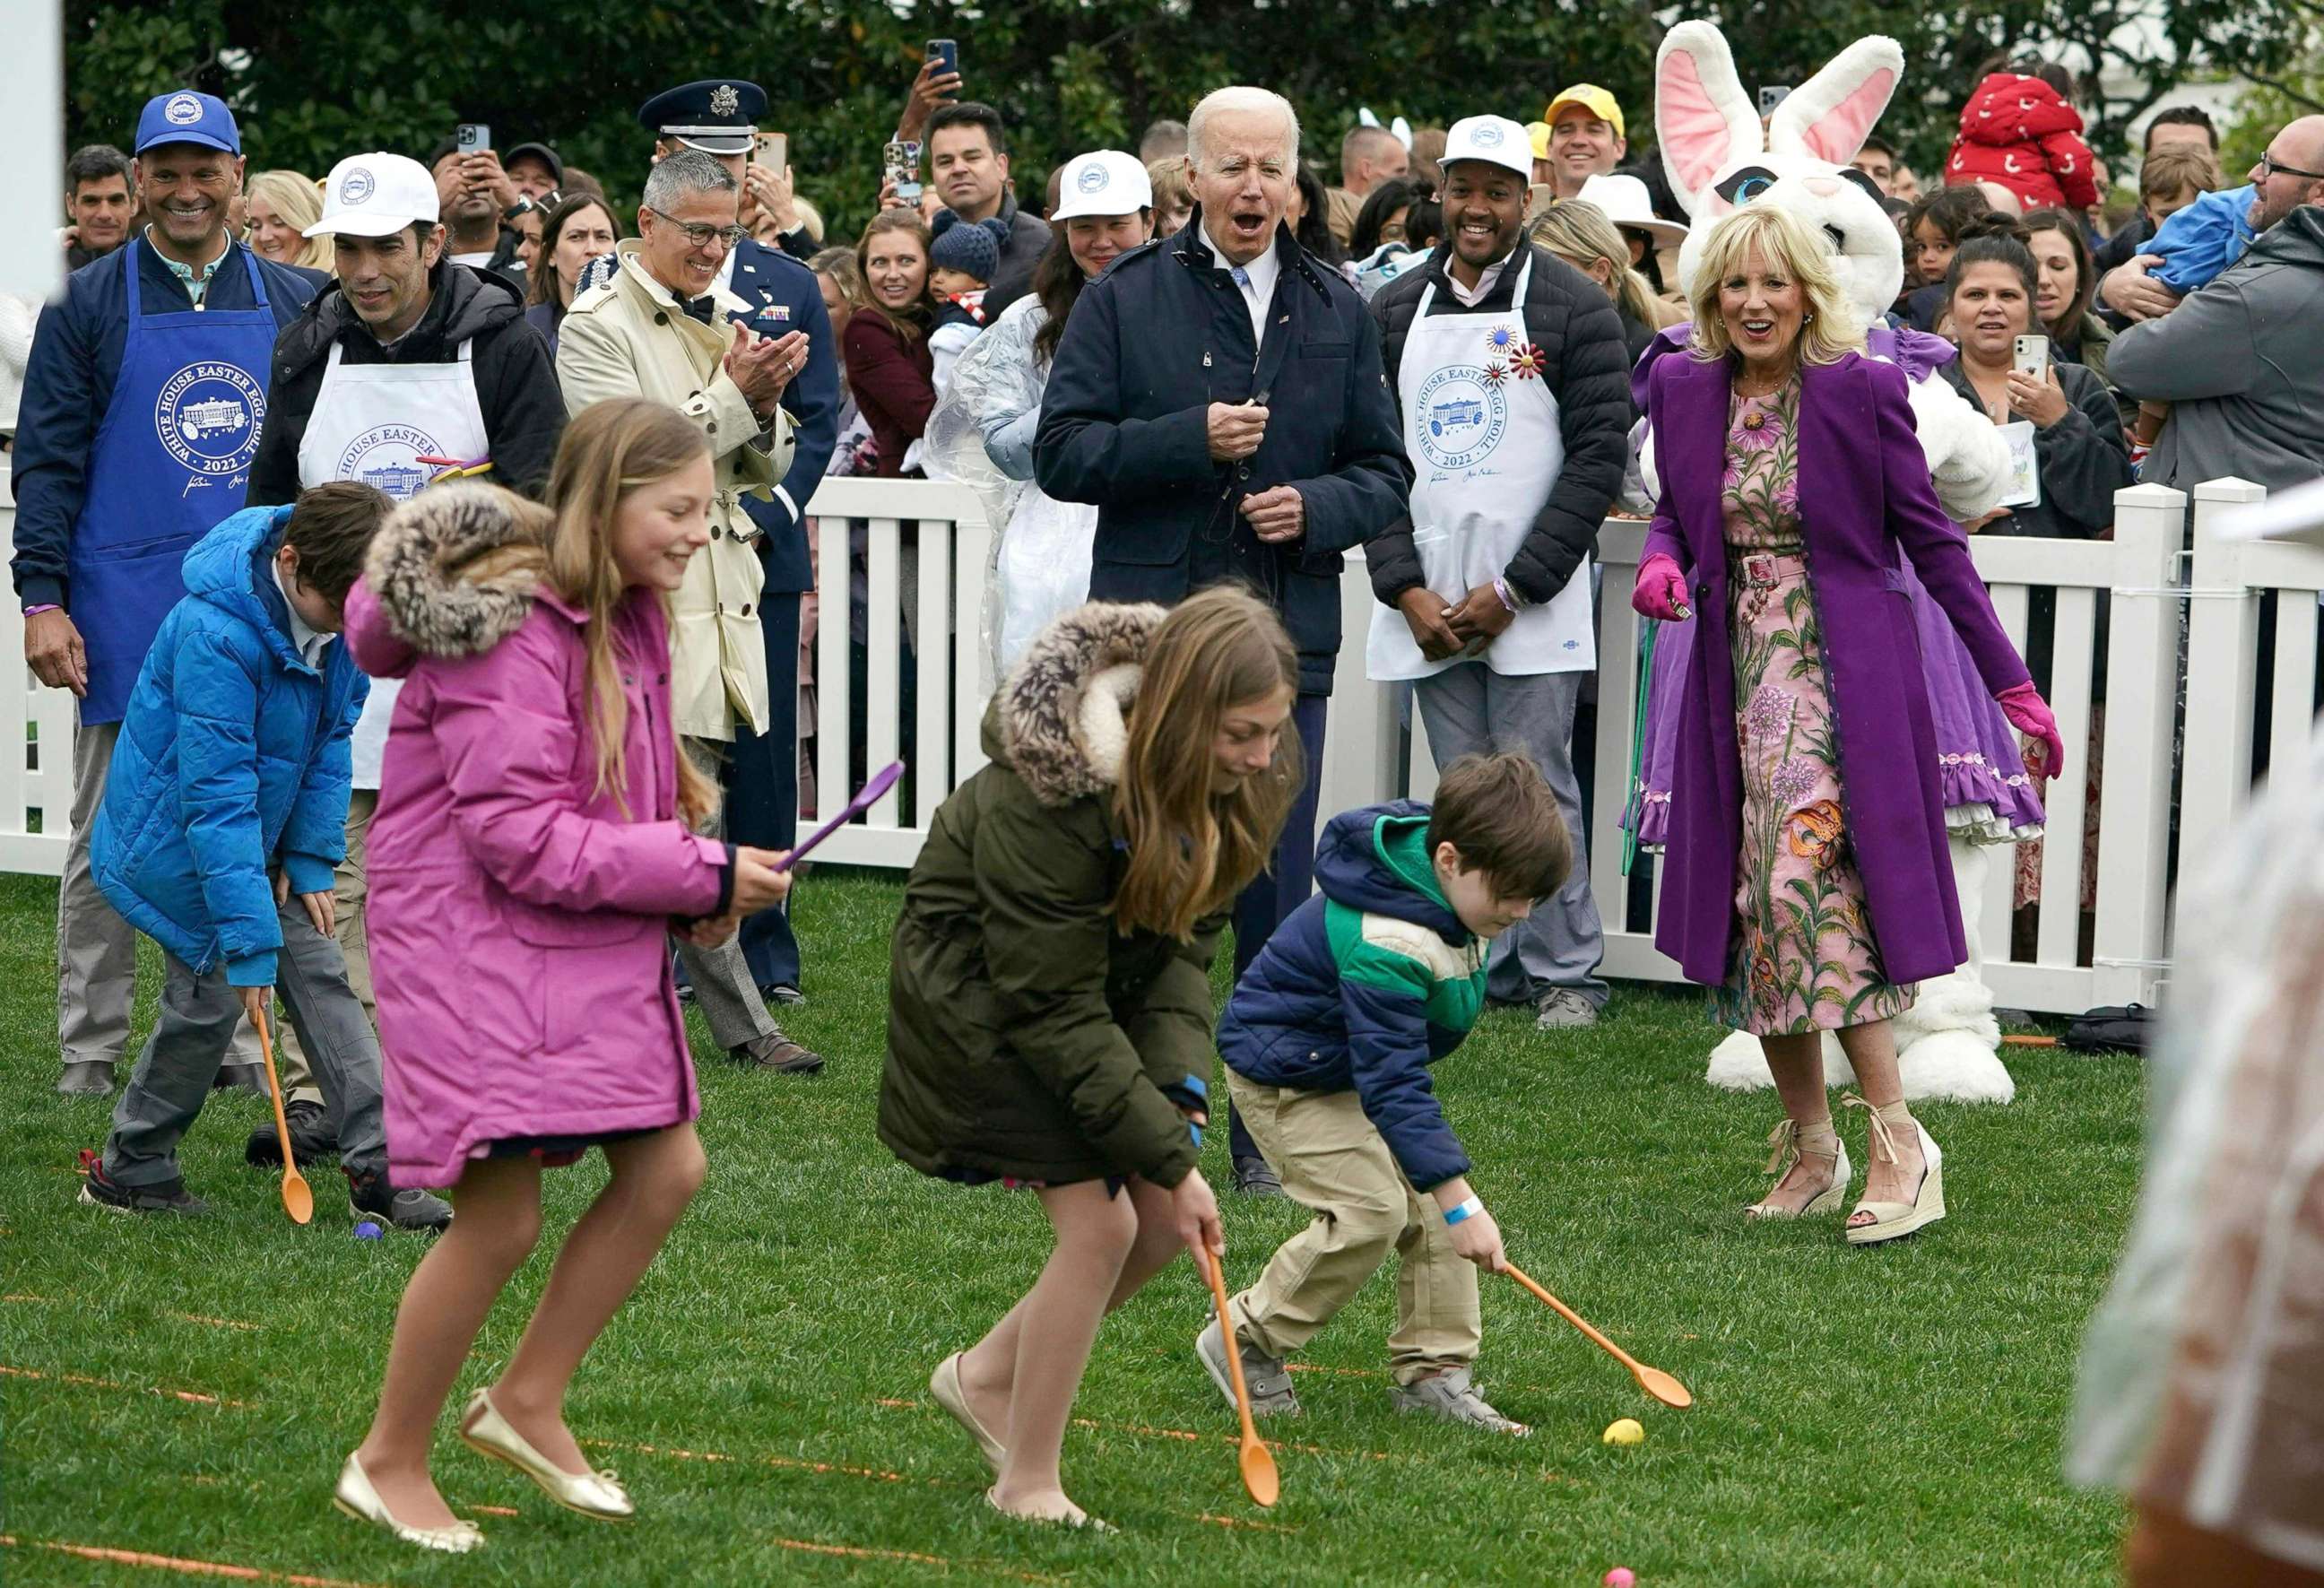 PHOTO: President Joe Biden and First Lady Jill Biden take part in the annual White House Easter Egg Roll on the South Lawn of the White House in Washington, D.C., April 18, 2022.